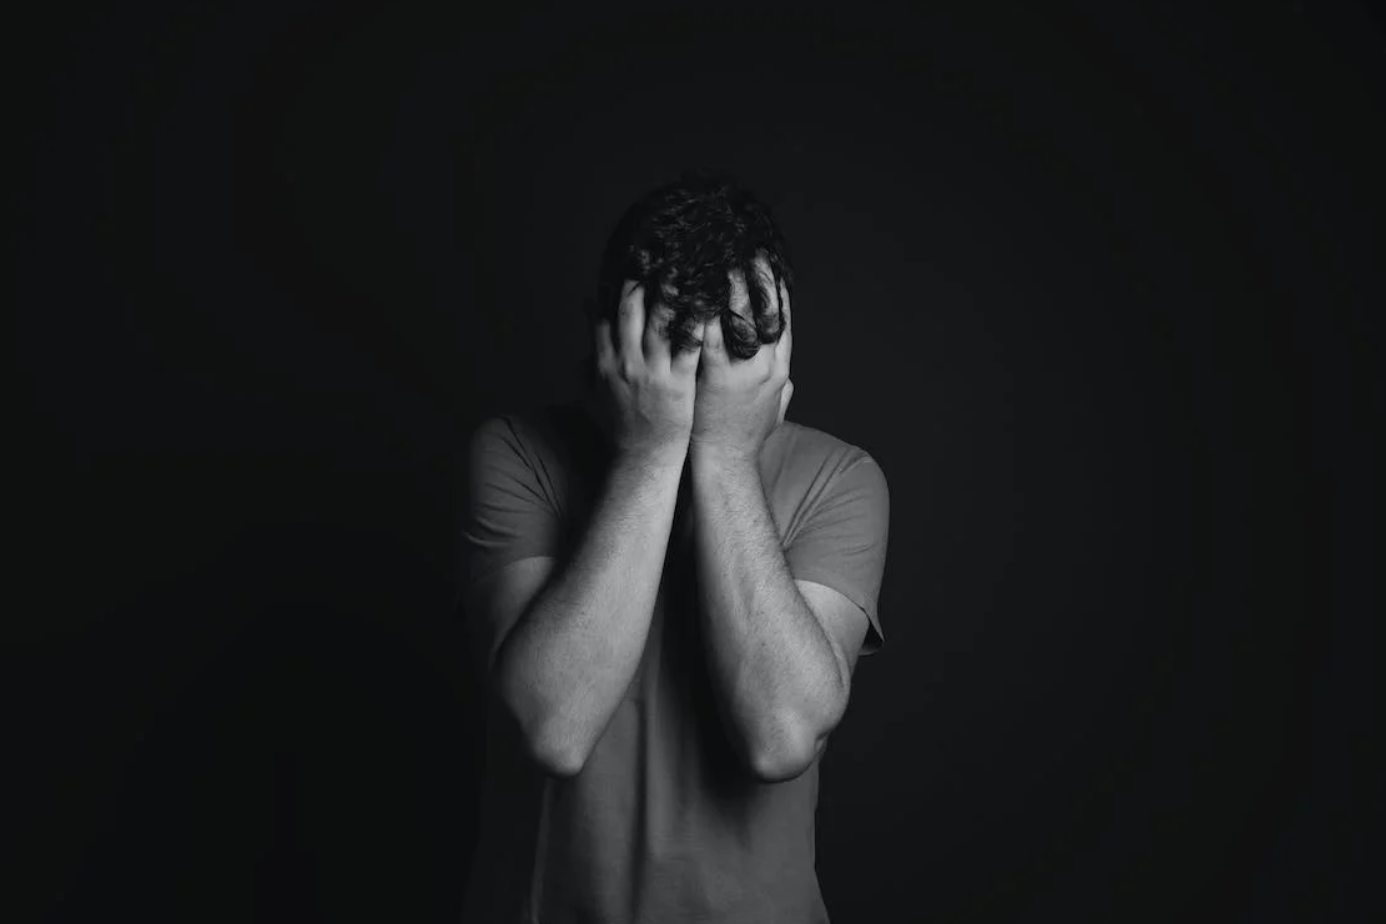 Grey scale photo of man covering his face with hands; image by Daniel Reche, via Pexels.com.